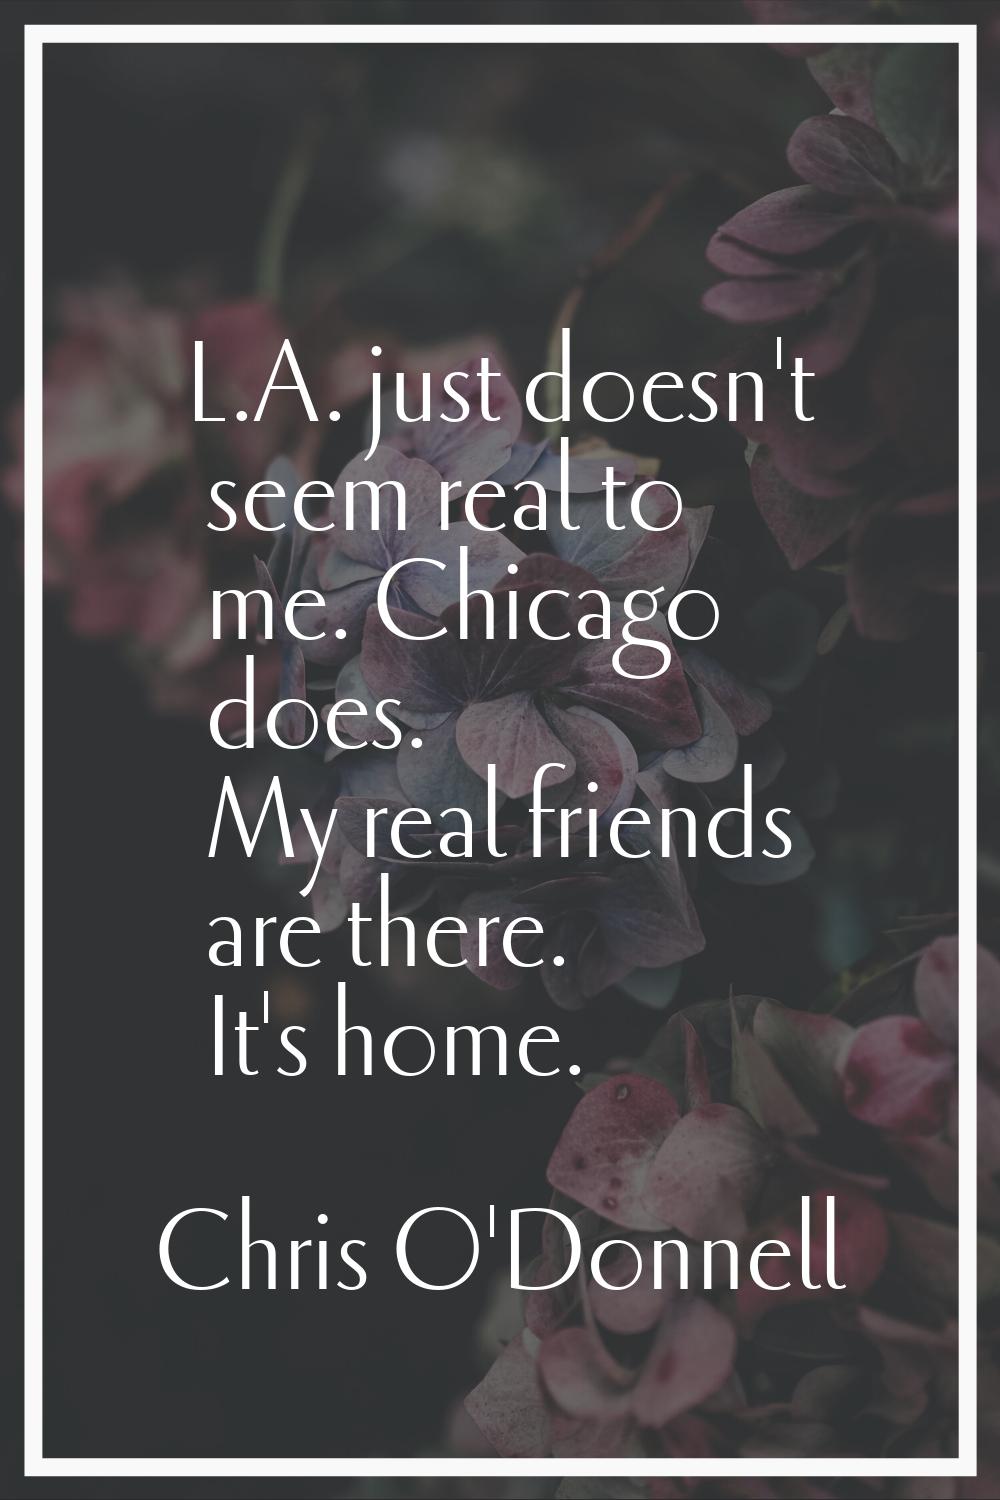 L.A. just doesn't seem real to me. Chicago does. My real friends are there. It's home.